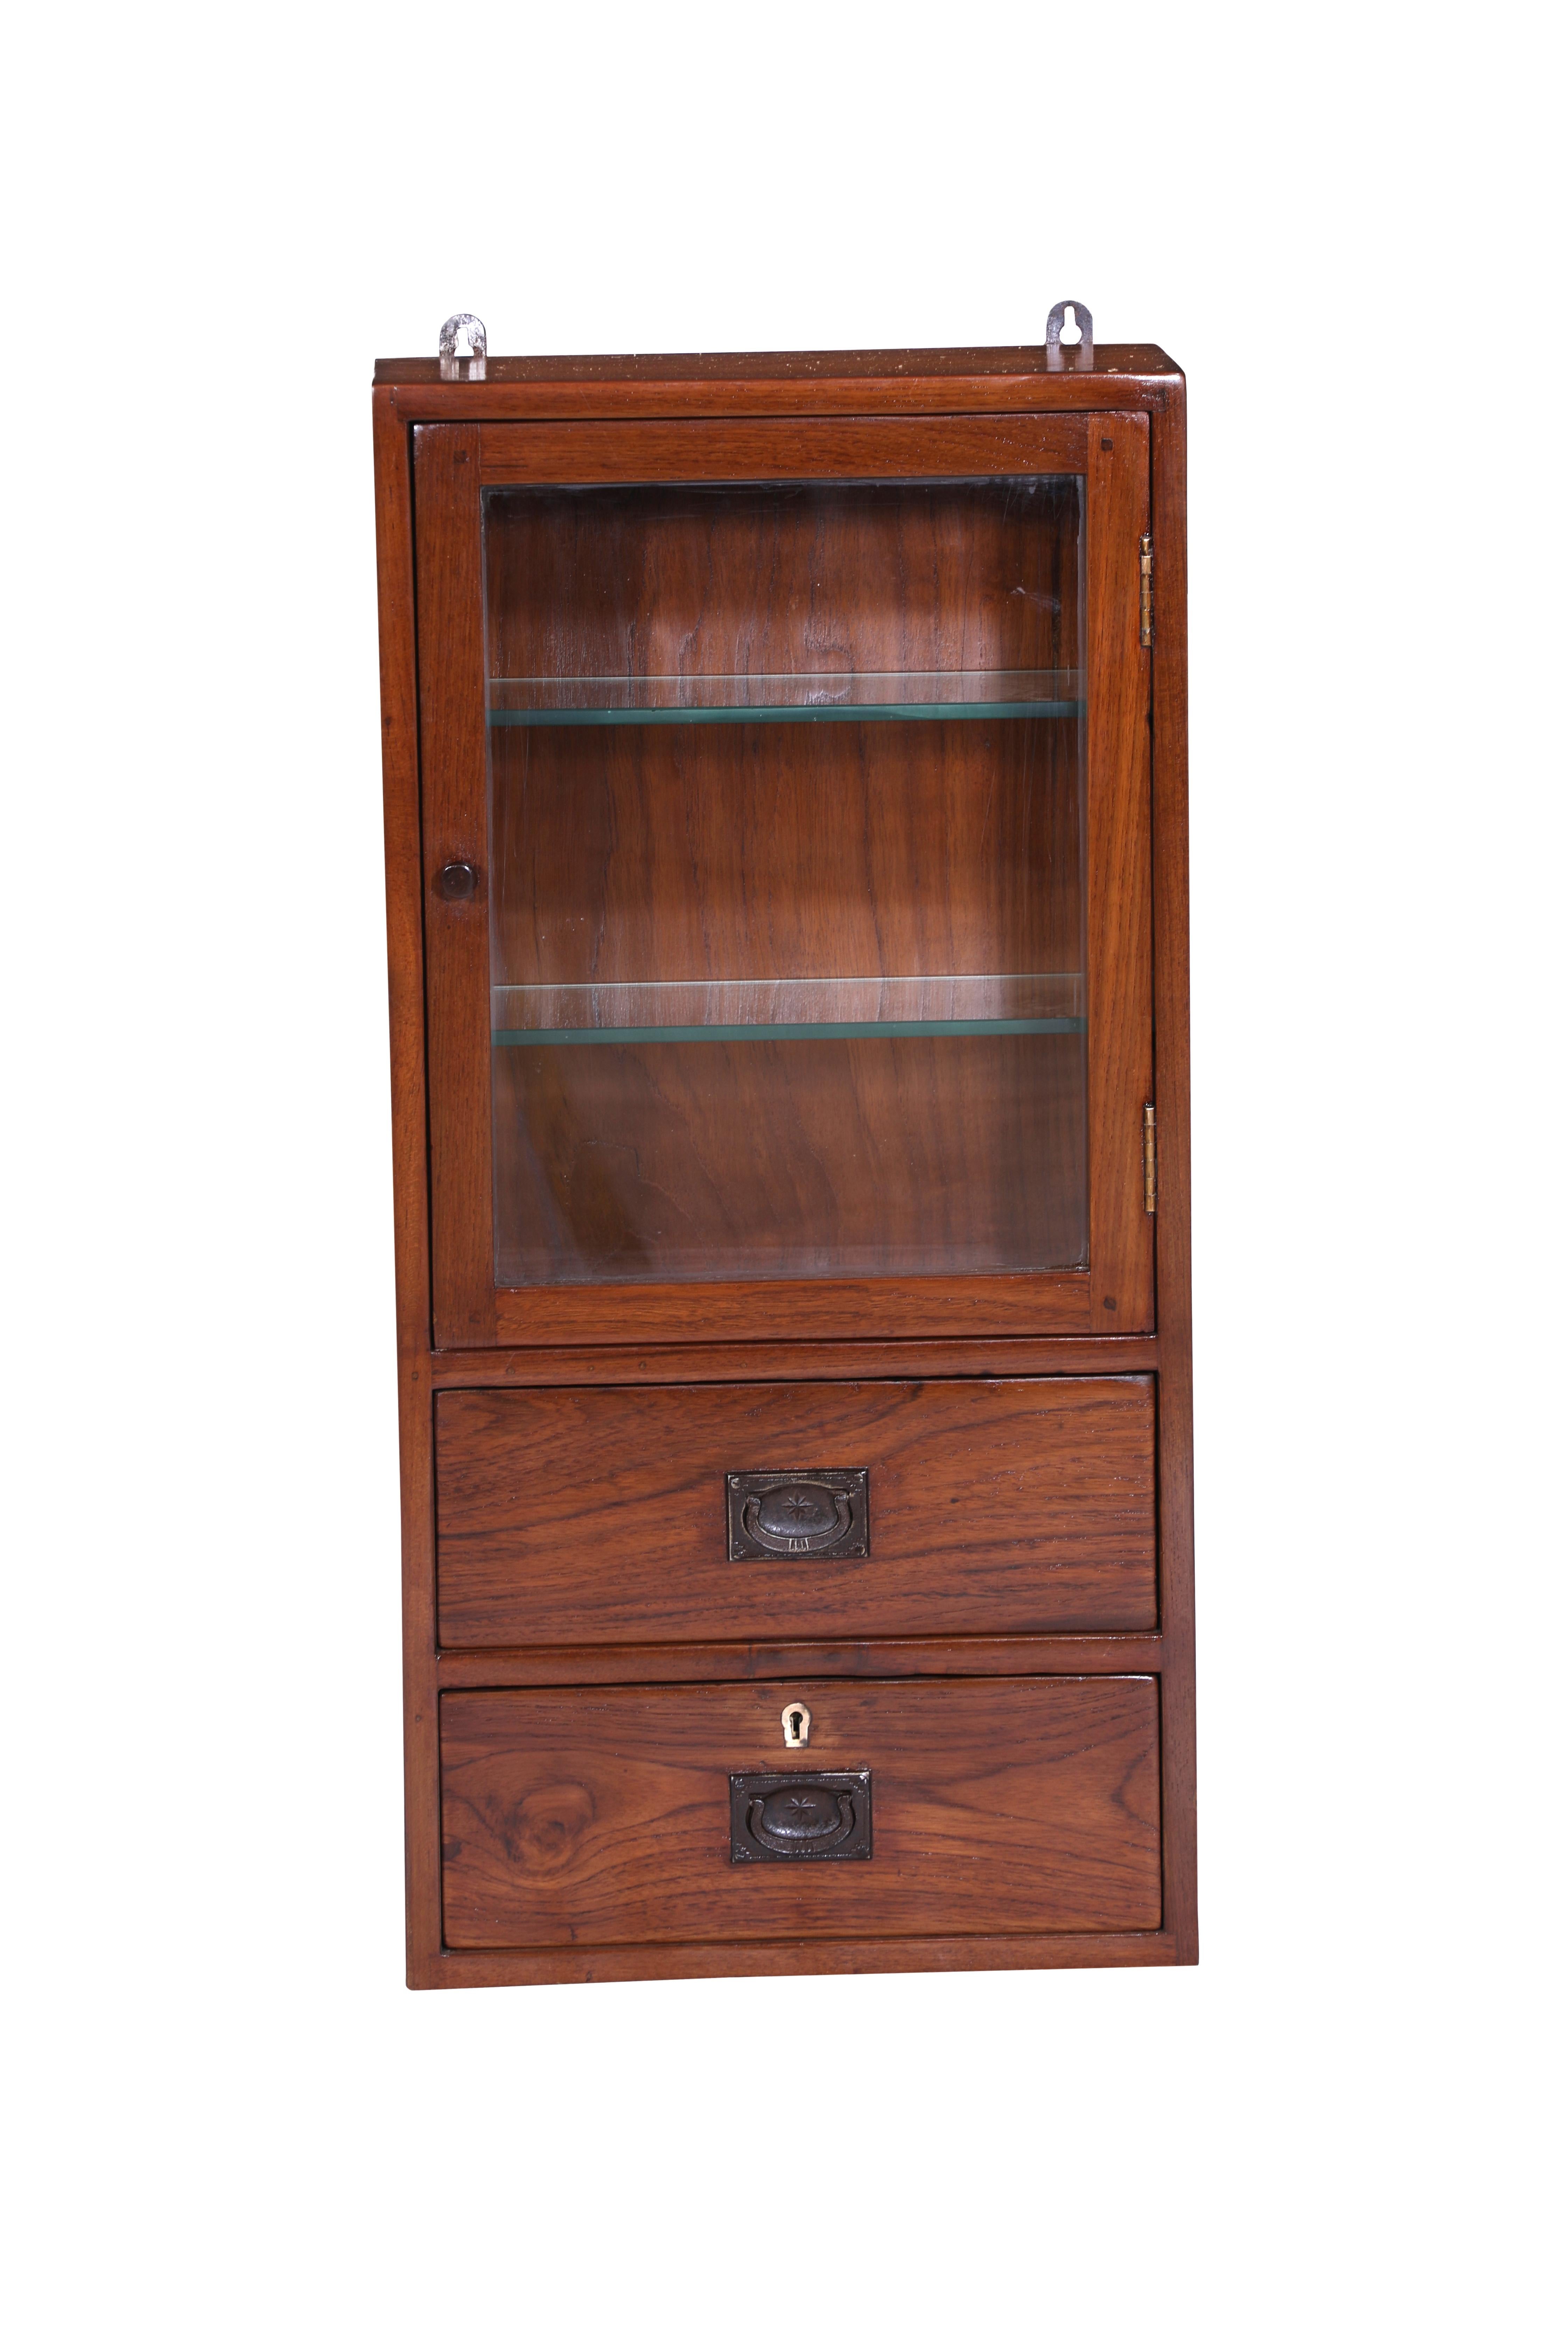 Teak wood wall cabinet with glass front and two interior glass shelves.  Two lower cabinet drawers with iron flush-mount drawer pulls.  Two hooks at the top to allow for hanging.  Refinished.  Colonial British.

The Lockhart Collection is a